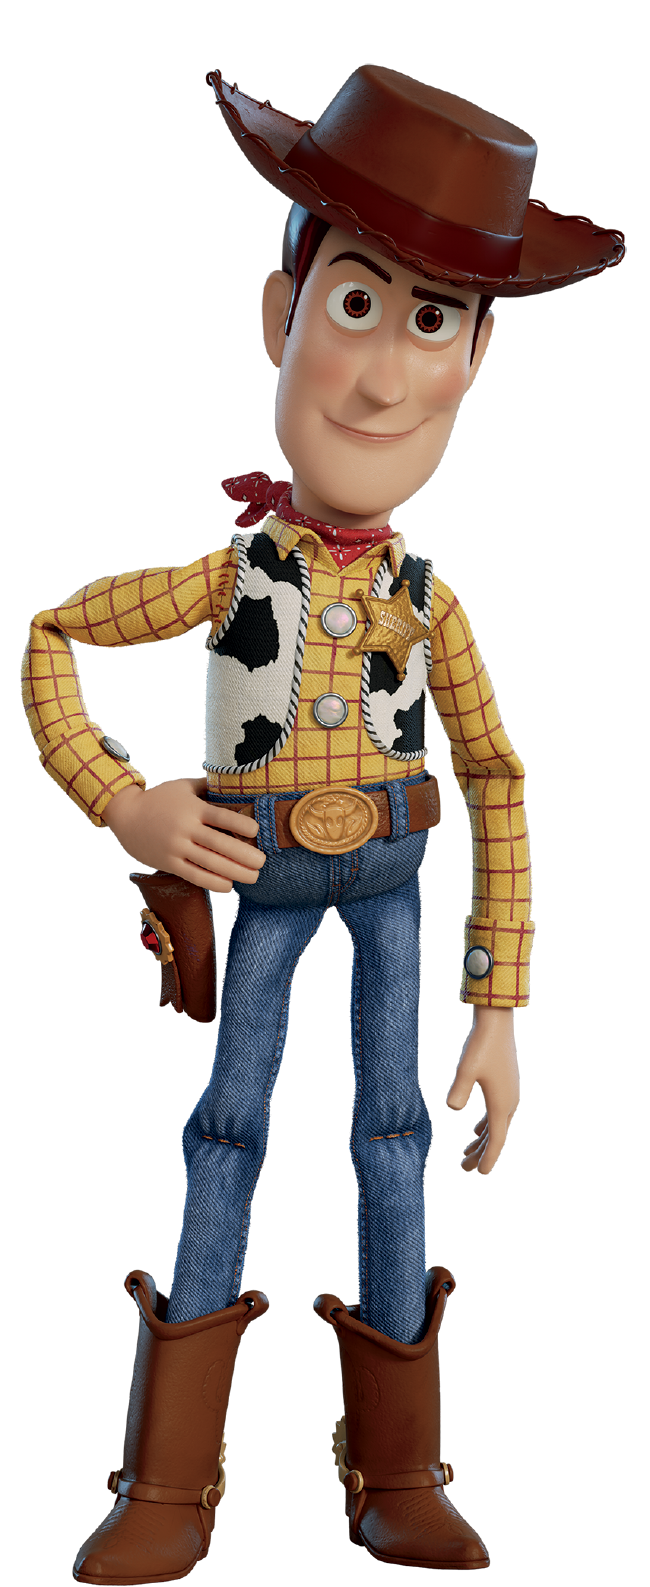 Toy story 4 Bonnie doesn't pick Woody 